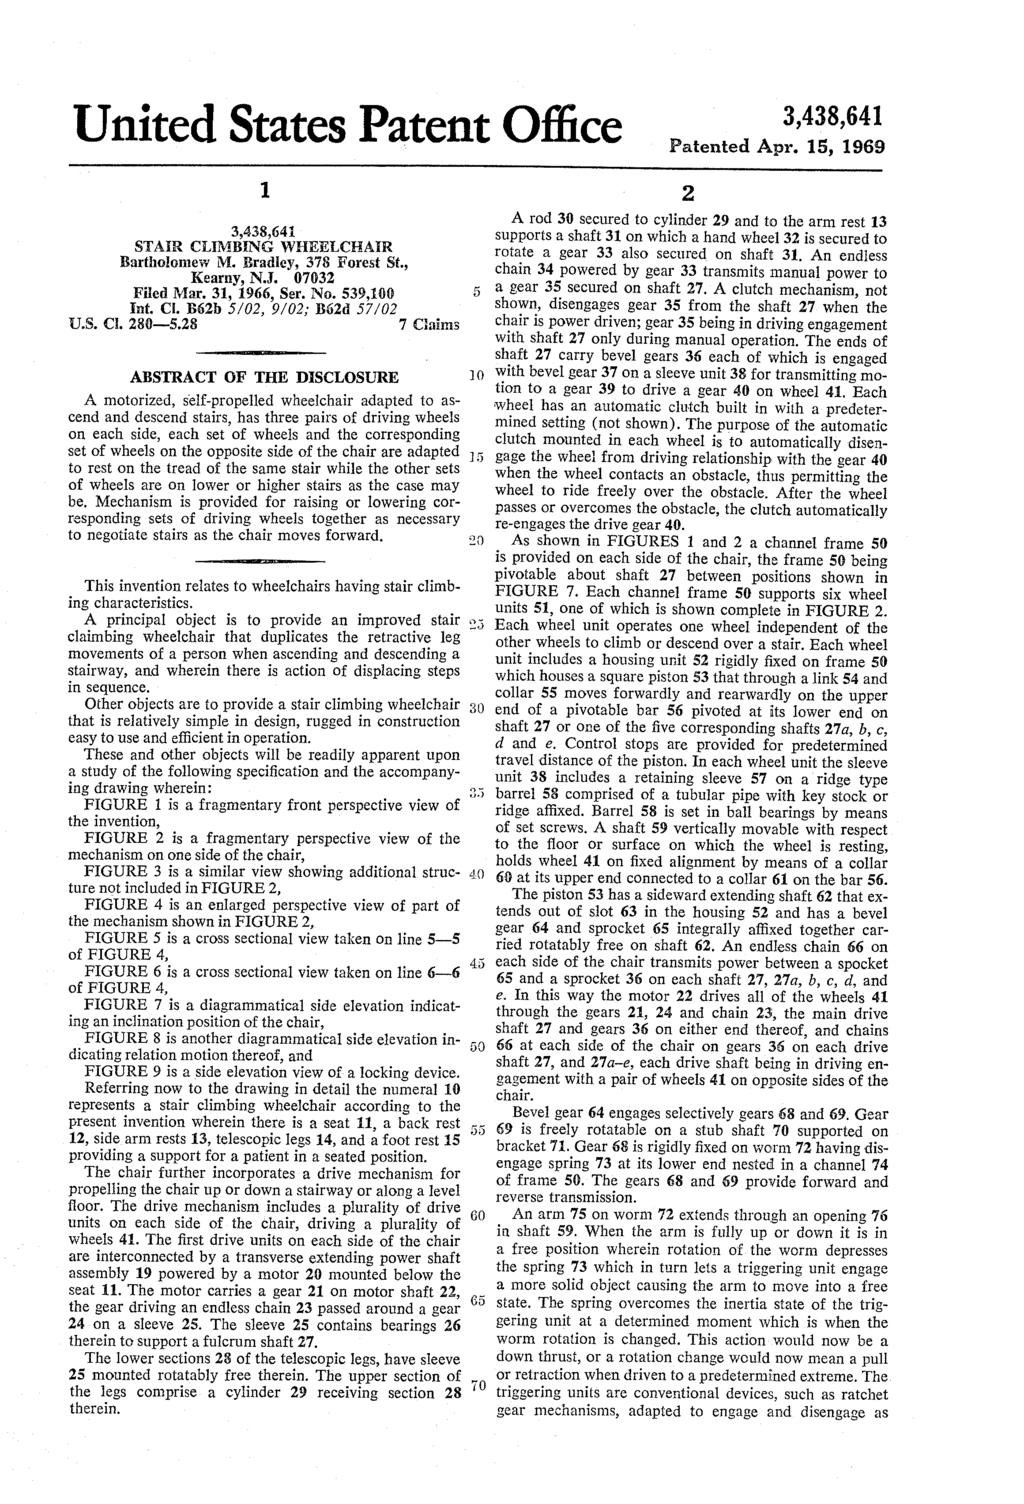 United States Patent Office Patented Apr. 15, 1969 1. 3,438,64 STAR CLMBENG WHEELCHAIR Bartholomew M. Bradley, 378 Forest St., Kearny, N.J. 07032 Filed Mar. 31, 1966, Ser. No. 539,100 Int. C. B62b 5/02, 9/02, B62d 57/02 U.